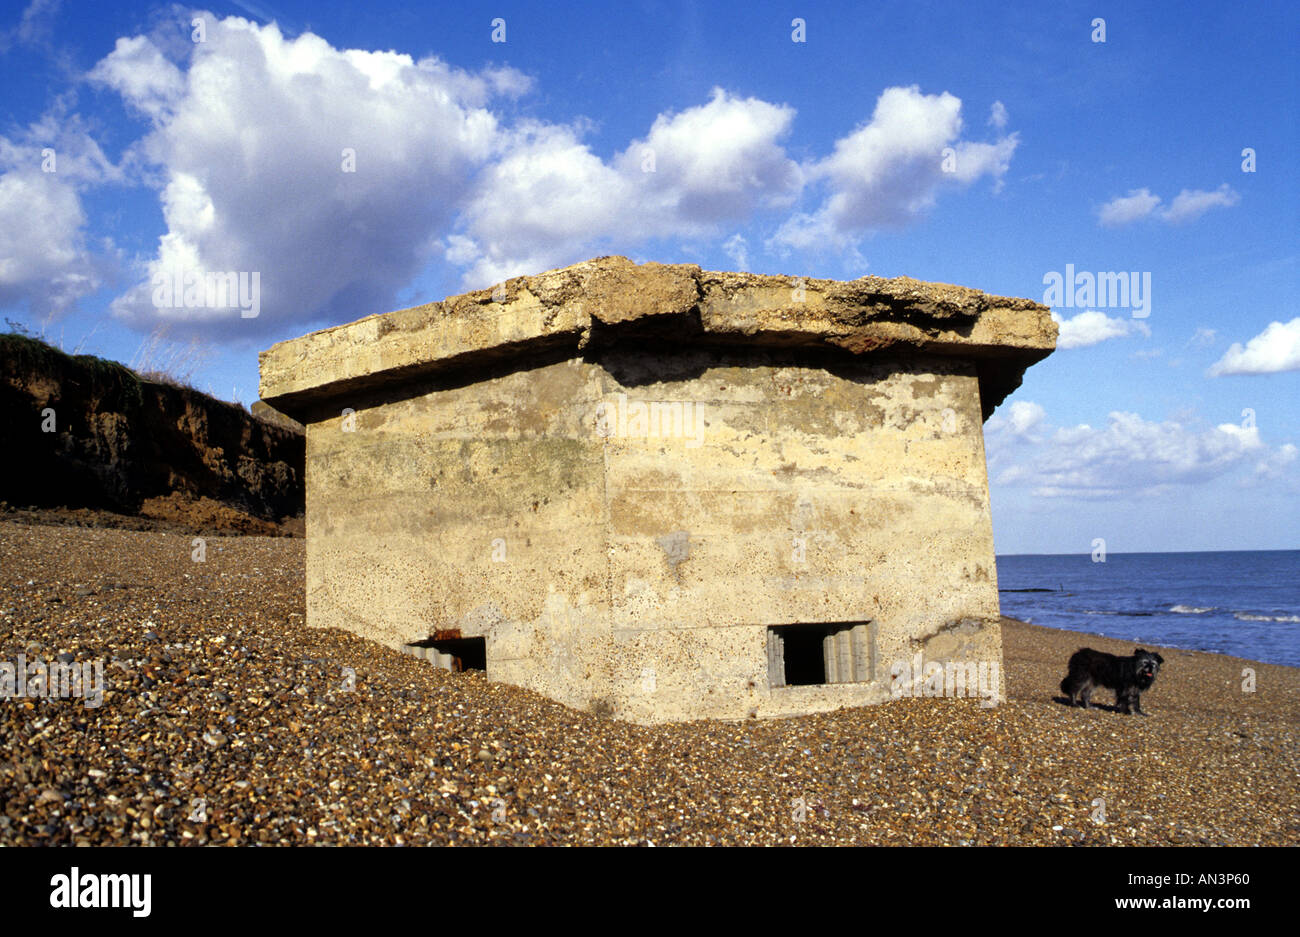 Second World War pillbox which has fallen on the beach due to coastal erosion at East Lane Bawdsey, Suffolk, UK. Stock Photo